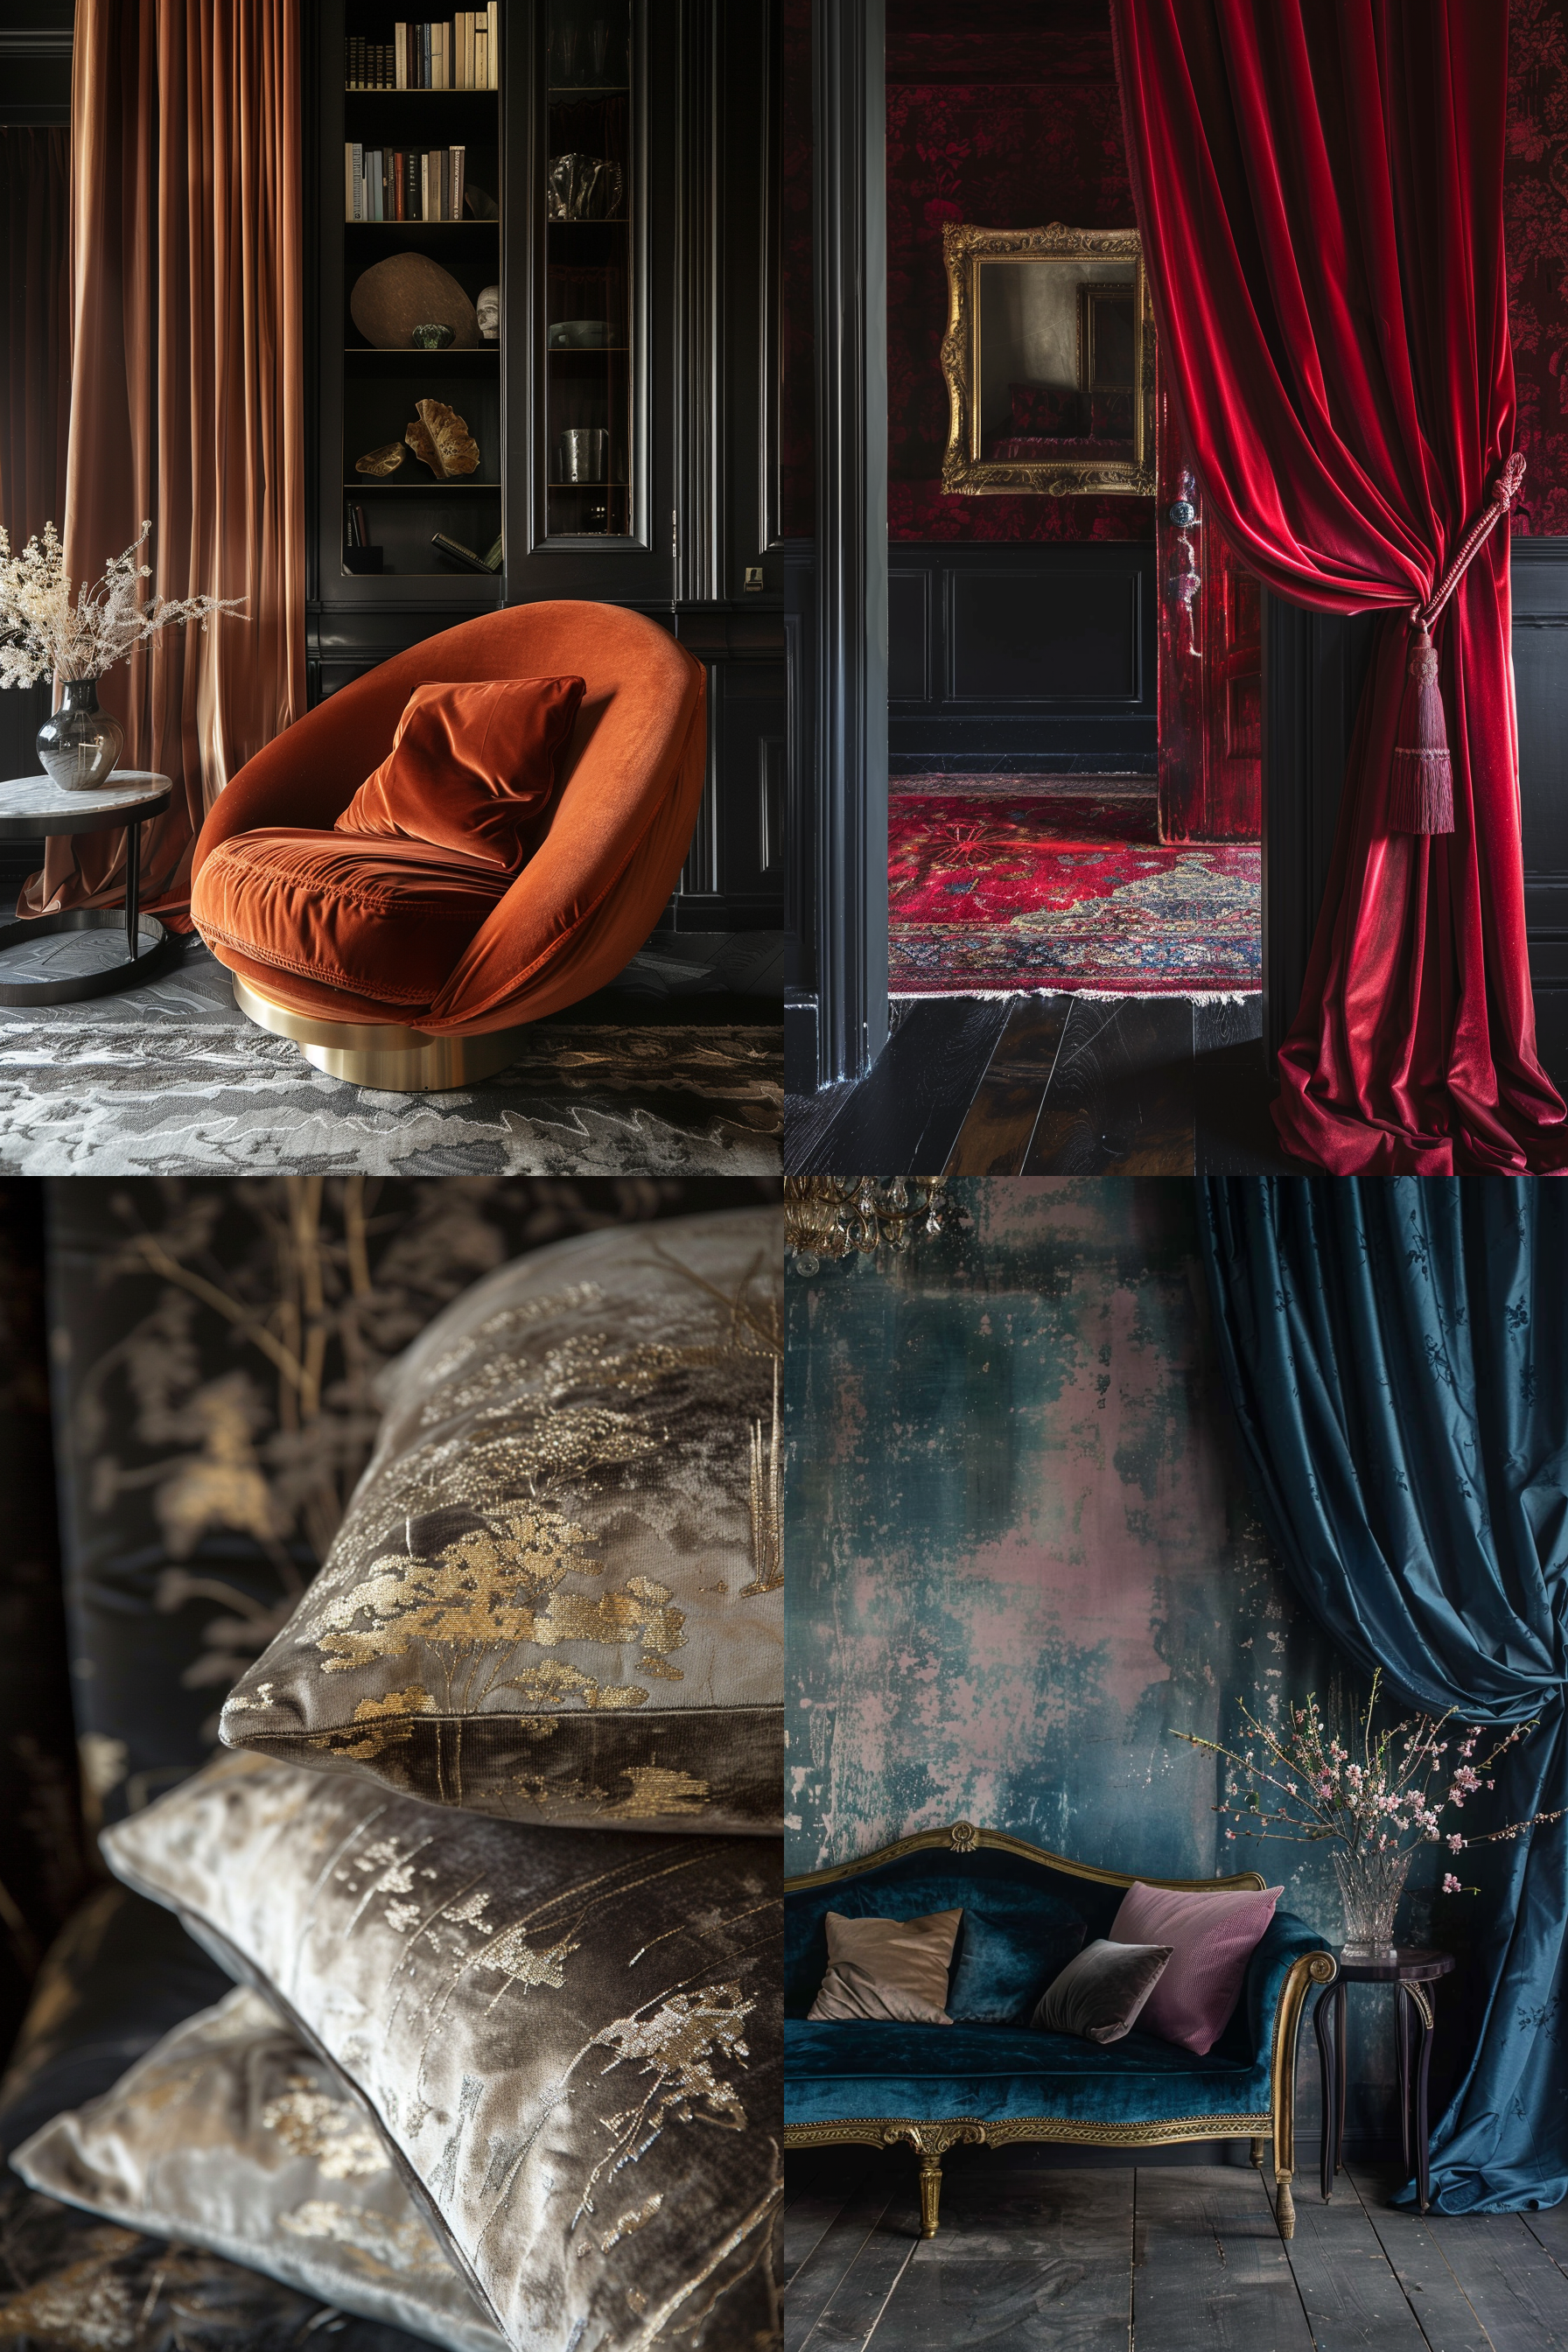 Four images showcasing luxurious interior decor with rich colors, including a velvet chair, draped curtains, decorative pillows, and a vintage sofa.